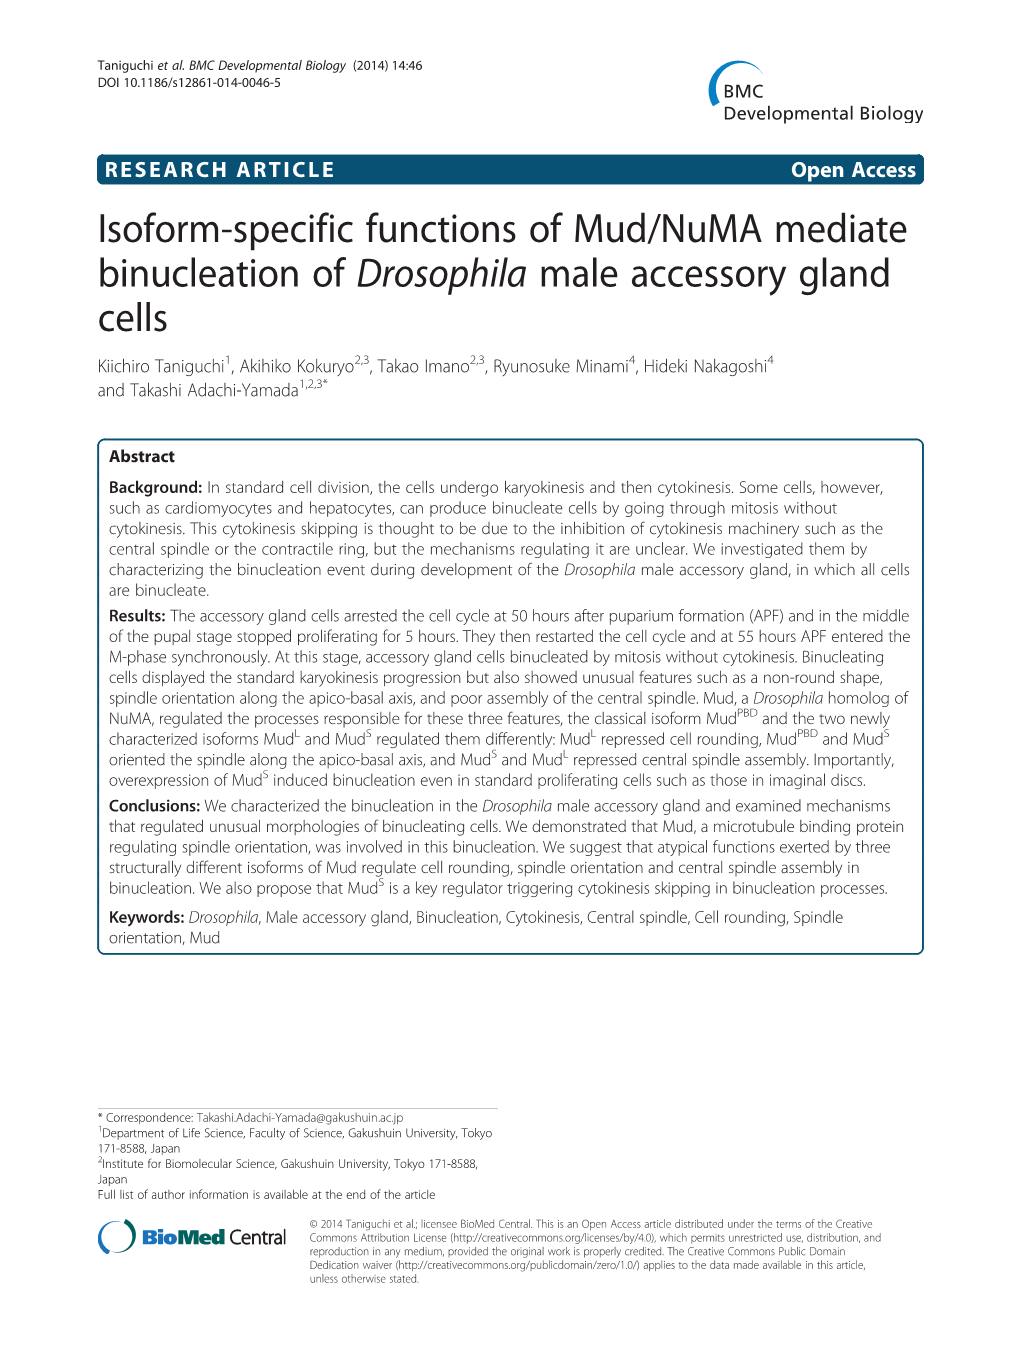 Isoform-Specific Functions of Mud/Numa Mediate Binucleation Of